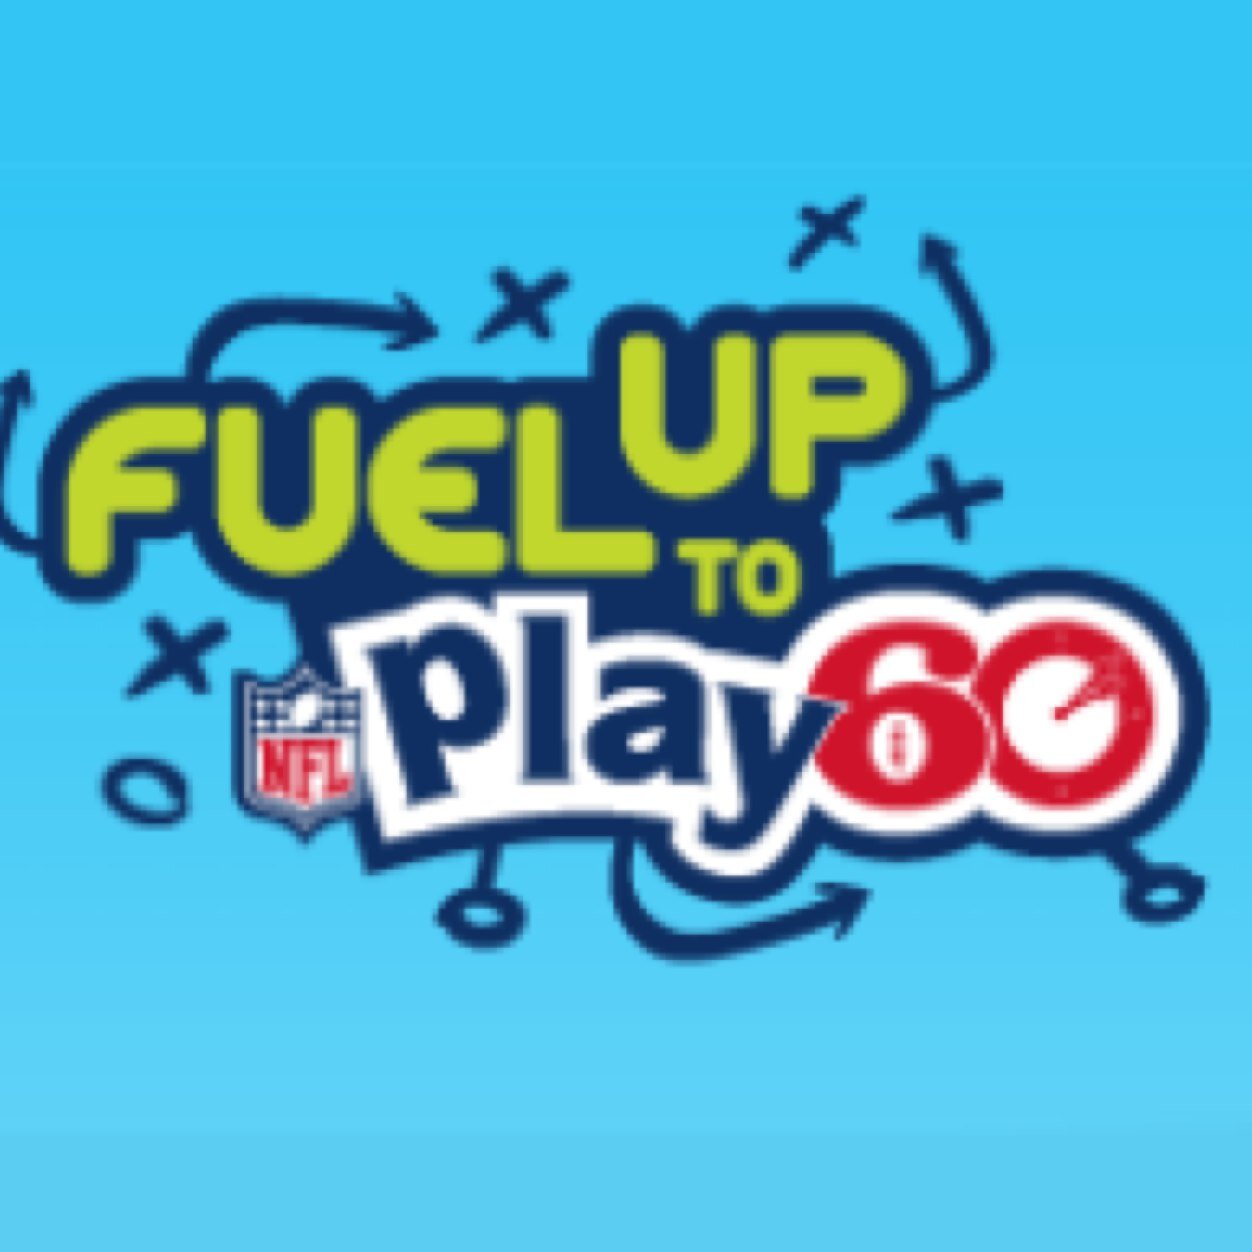 Fuel Up to Play 60's elite group of Student Ambassadors, leading the charge in making schools a healthier and more active environment for all students!